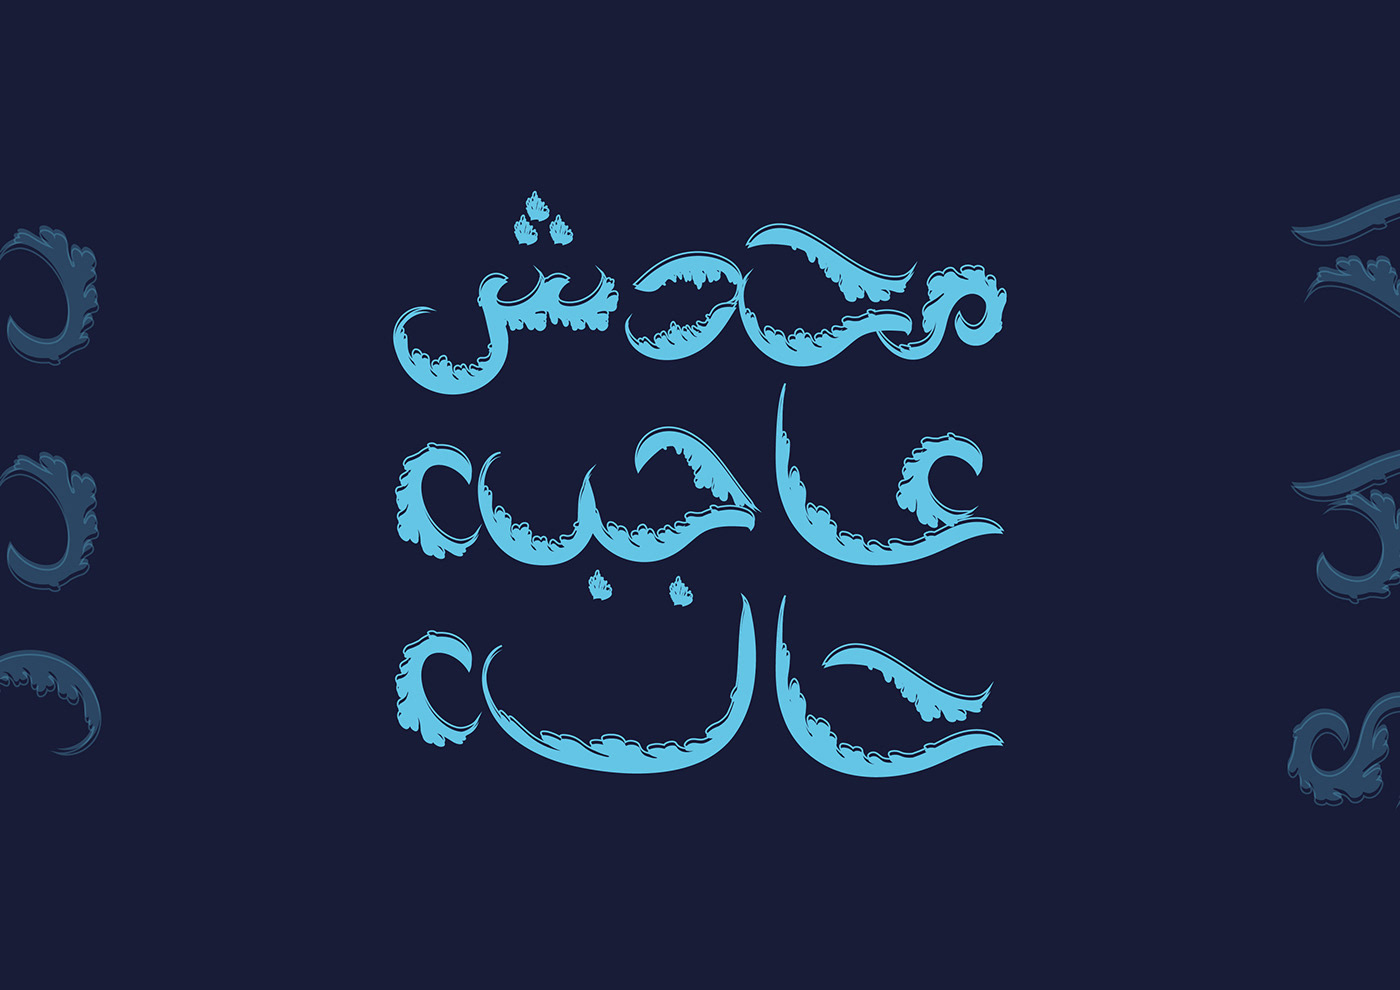 arabic calligraphy arabic type arabic typography Calligraphy   design ILLUSTRATION  lettring typedesign Typeface typography  